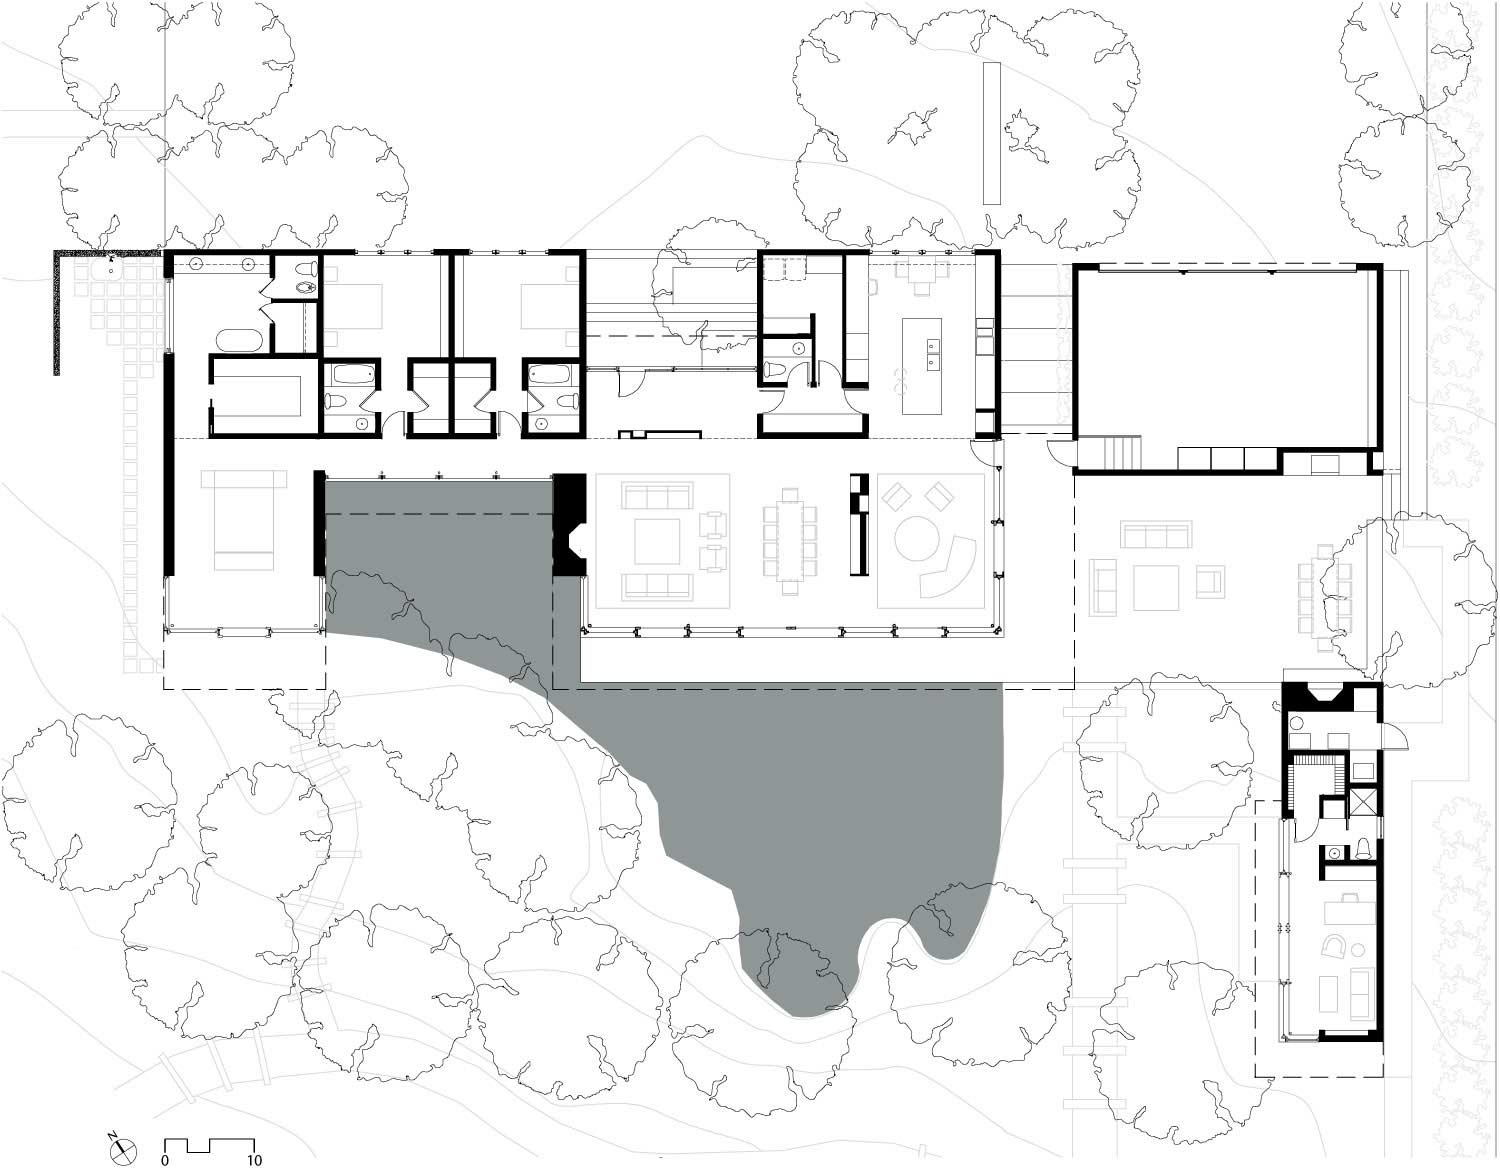 Floor Plan, Sustainable Retreat by the Pond in Atherton, California